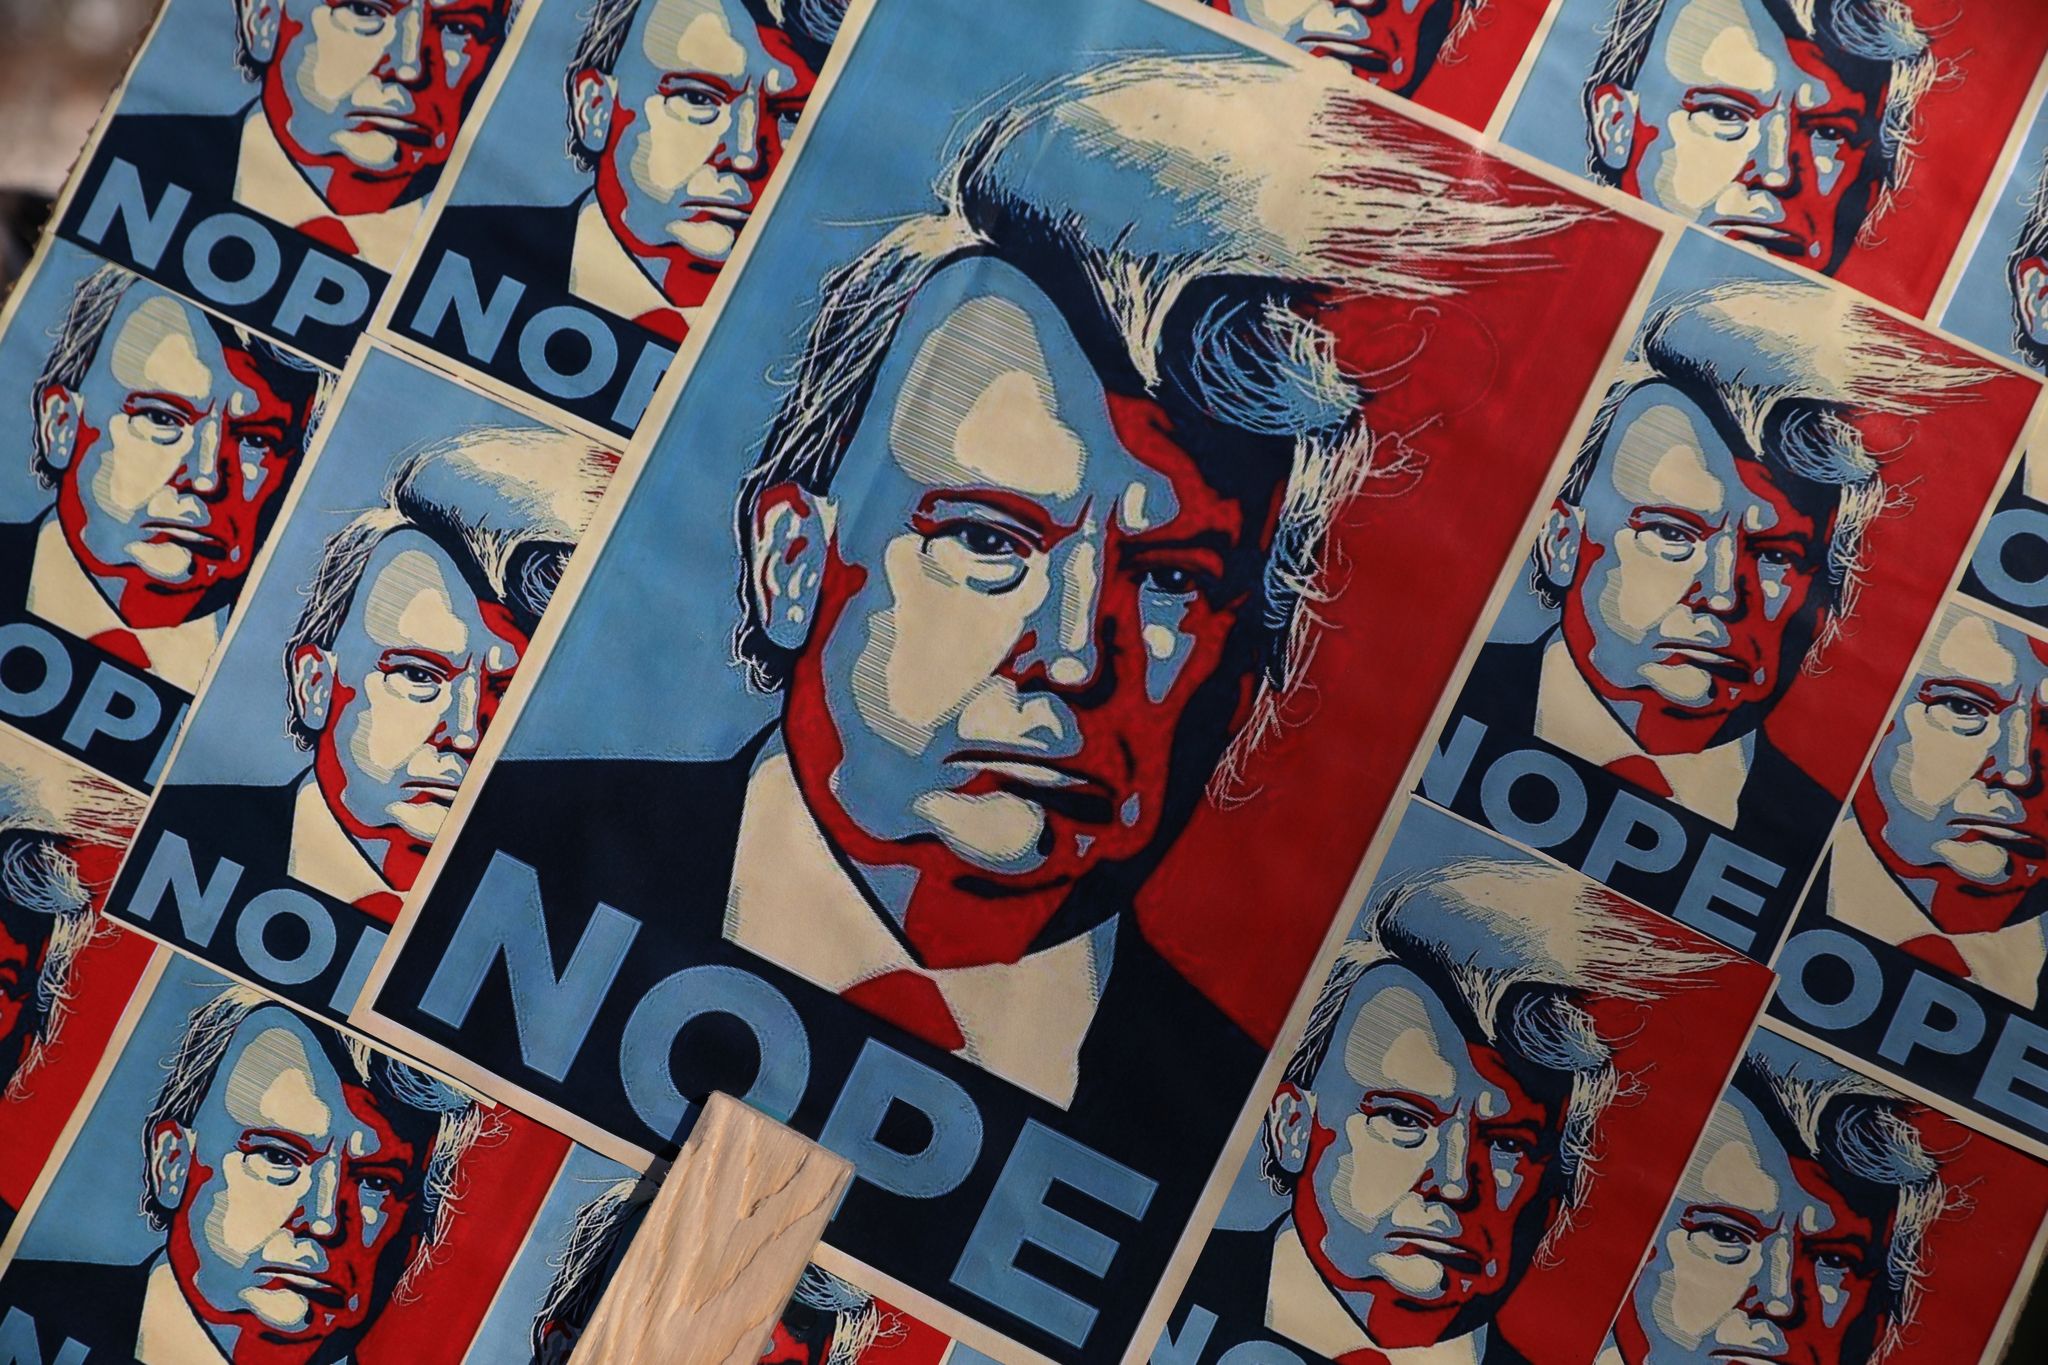 Posters showing Trump's image